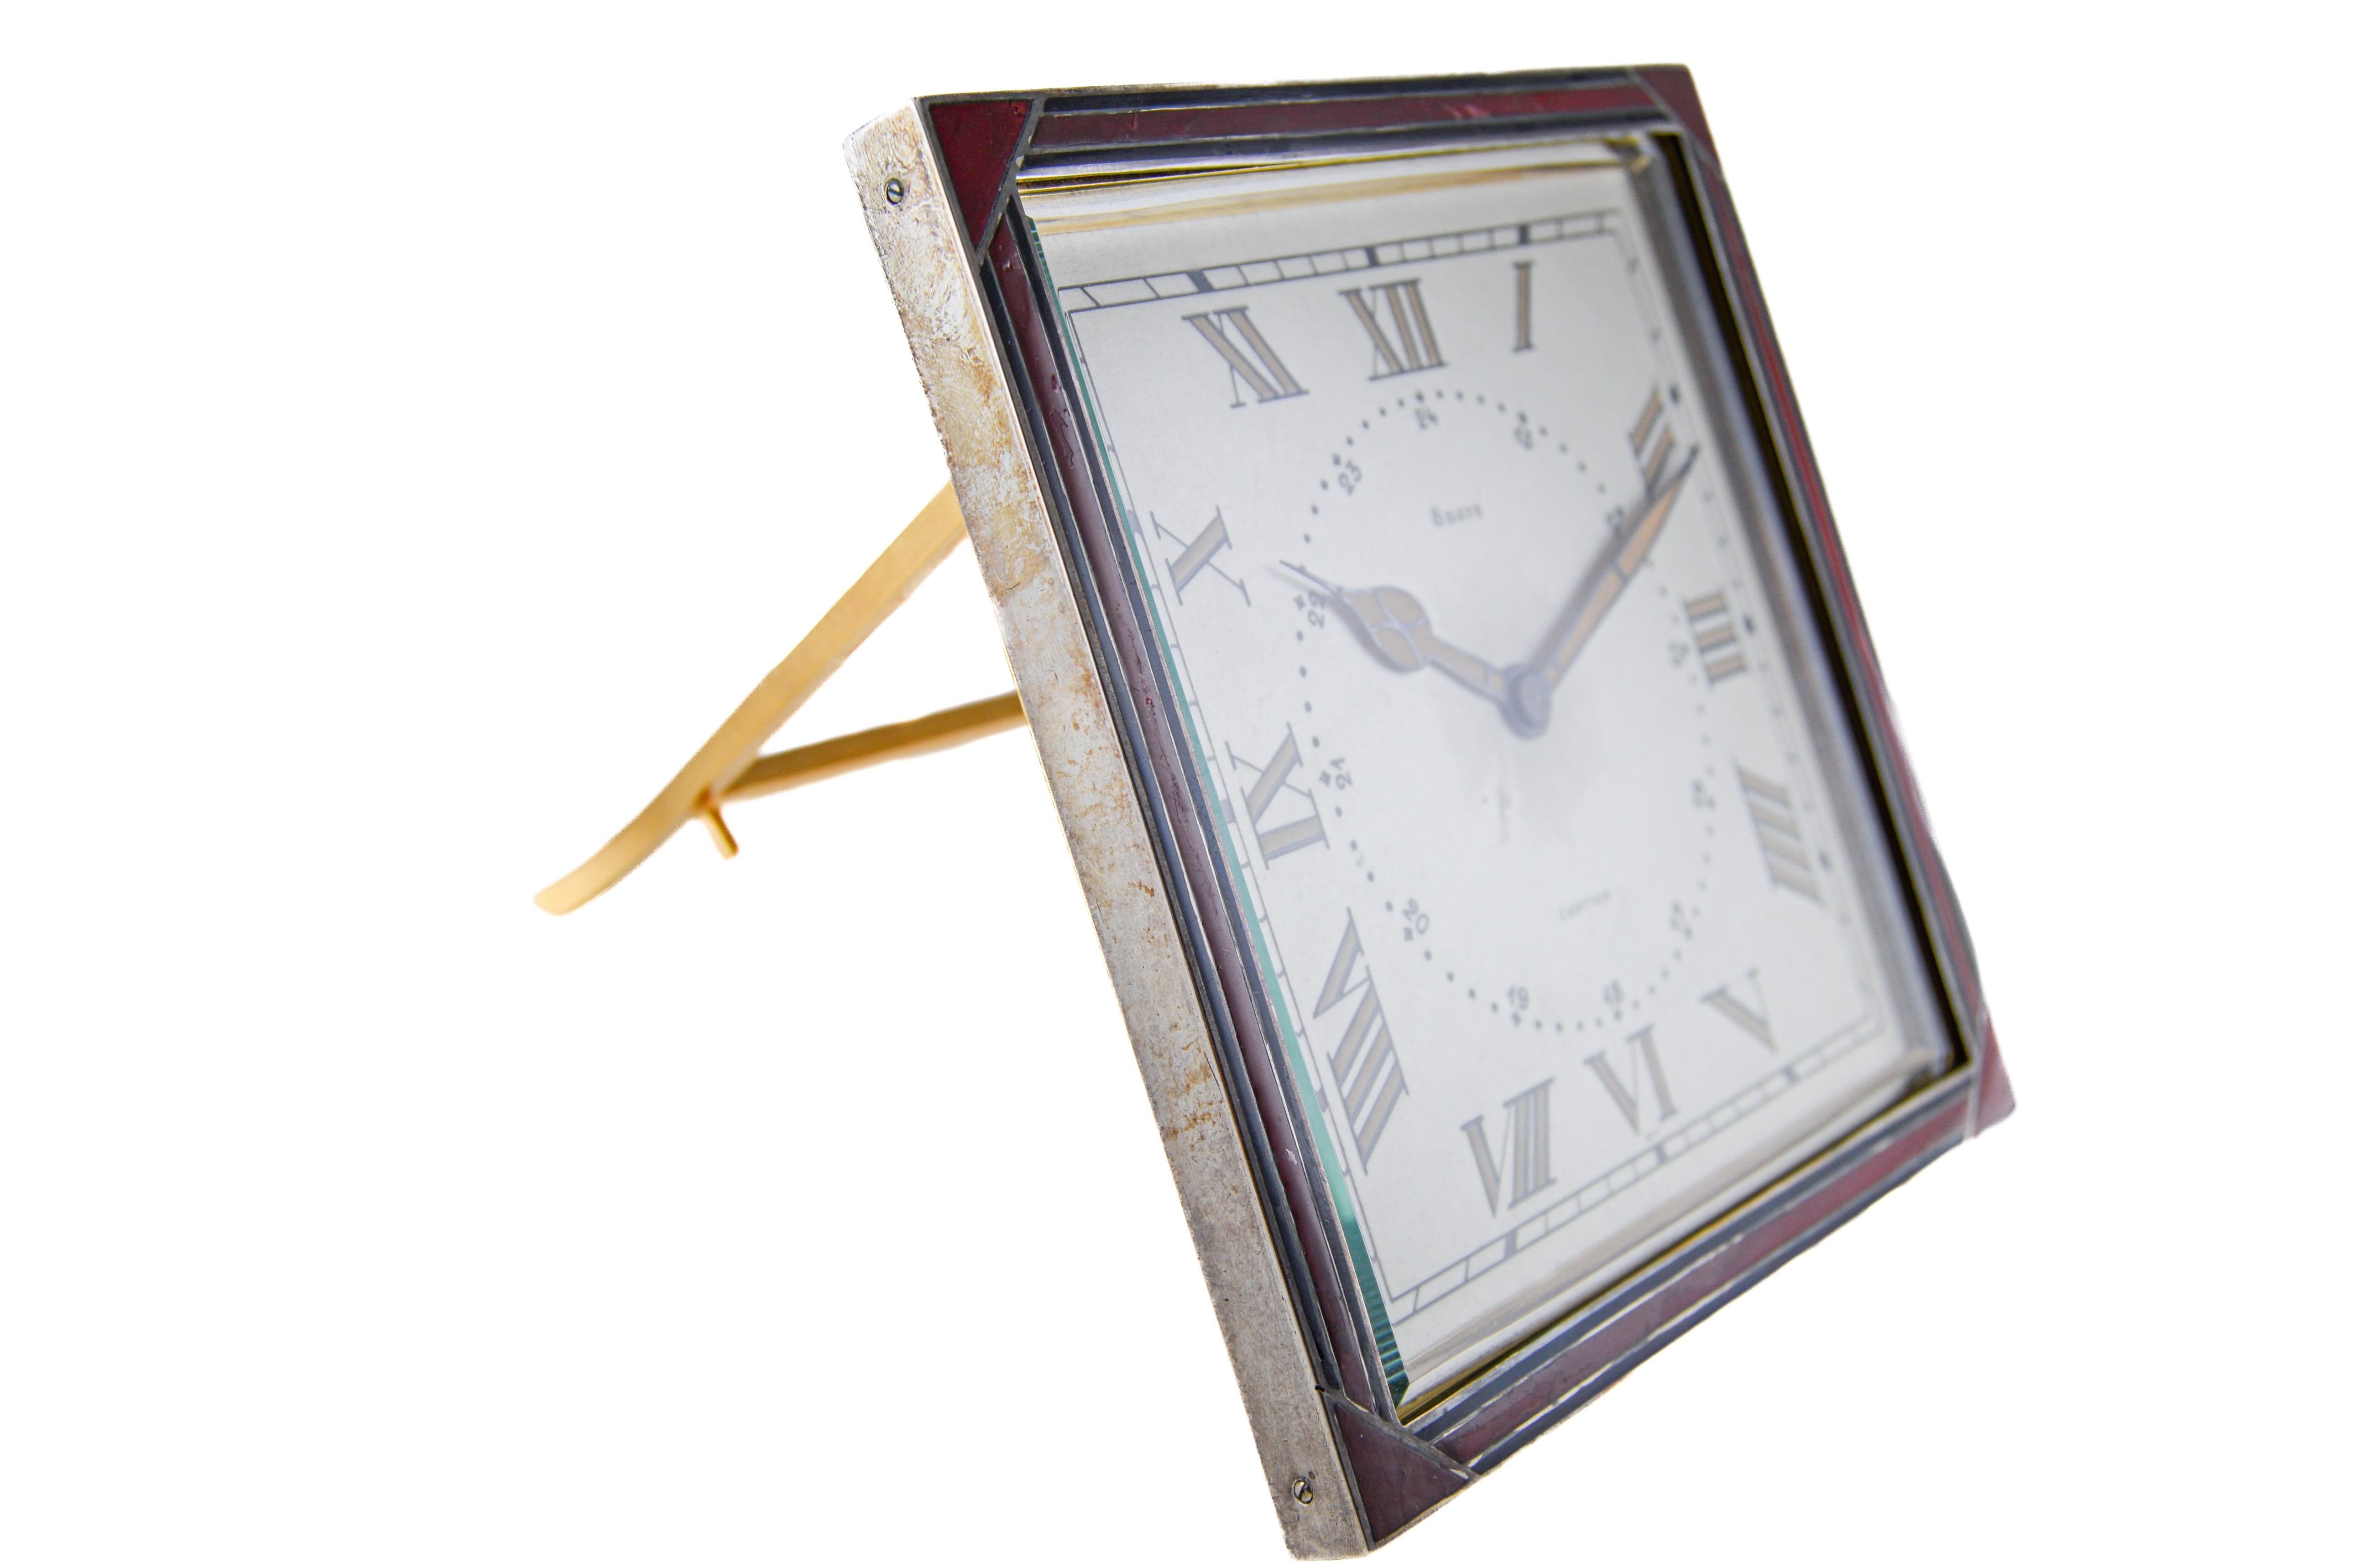 FACTORY / HOUSE: Cartier 
STYLE / REFERENCE: Art Deco / Desk Clock
METAL / MATERIAL: Sterling Silver / Kiln Fired Enamel 
CIRCA / YEAR: 1920's
DIMENSIONS / SIZE: 5 inches Length X 5 inches Width
MOVEMENT / CALIBER: Manual Winding / 15 Jewels 
DIAL /